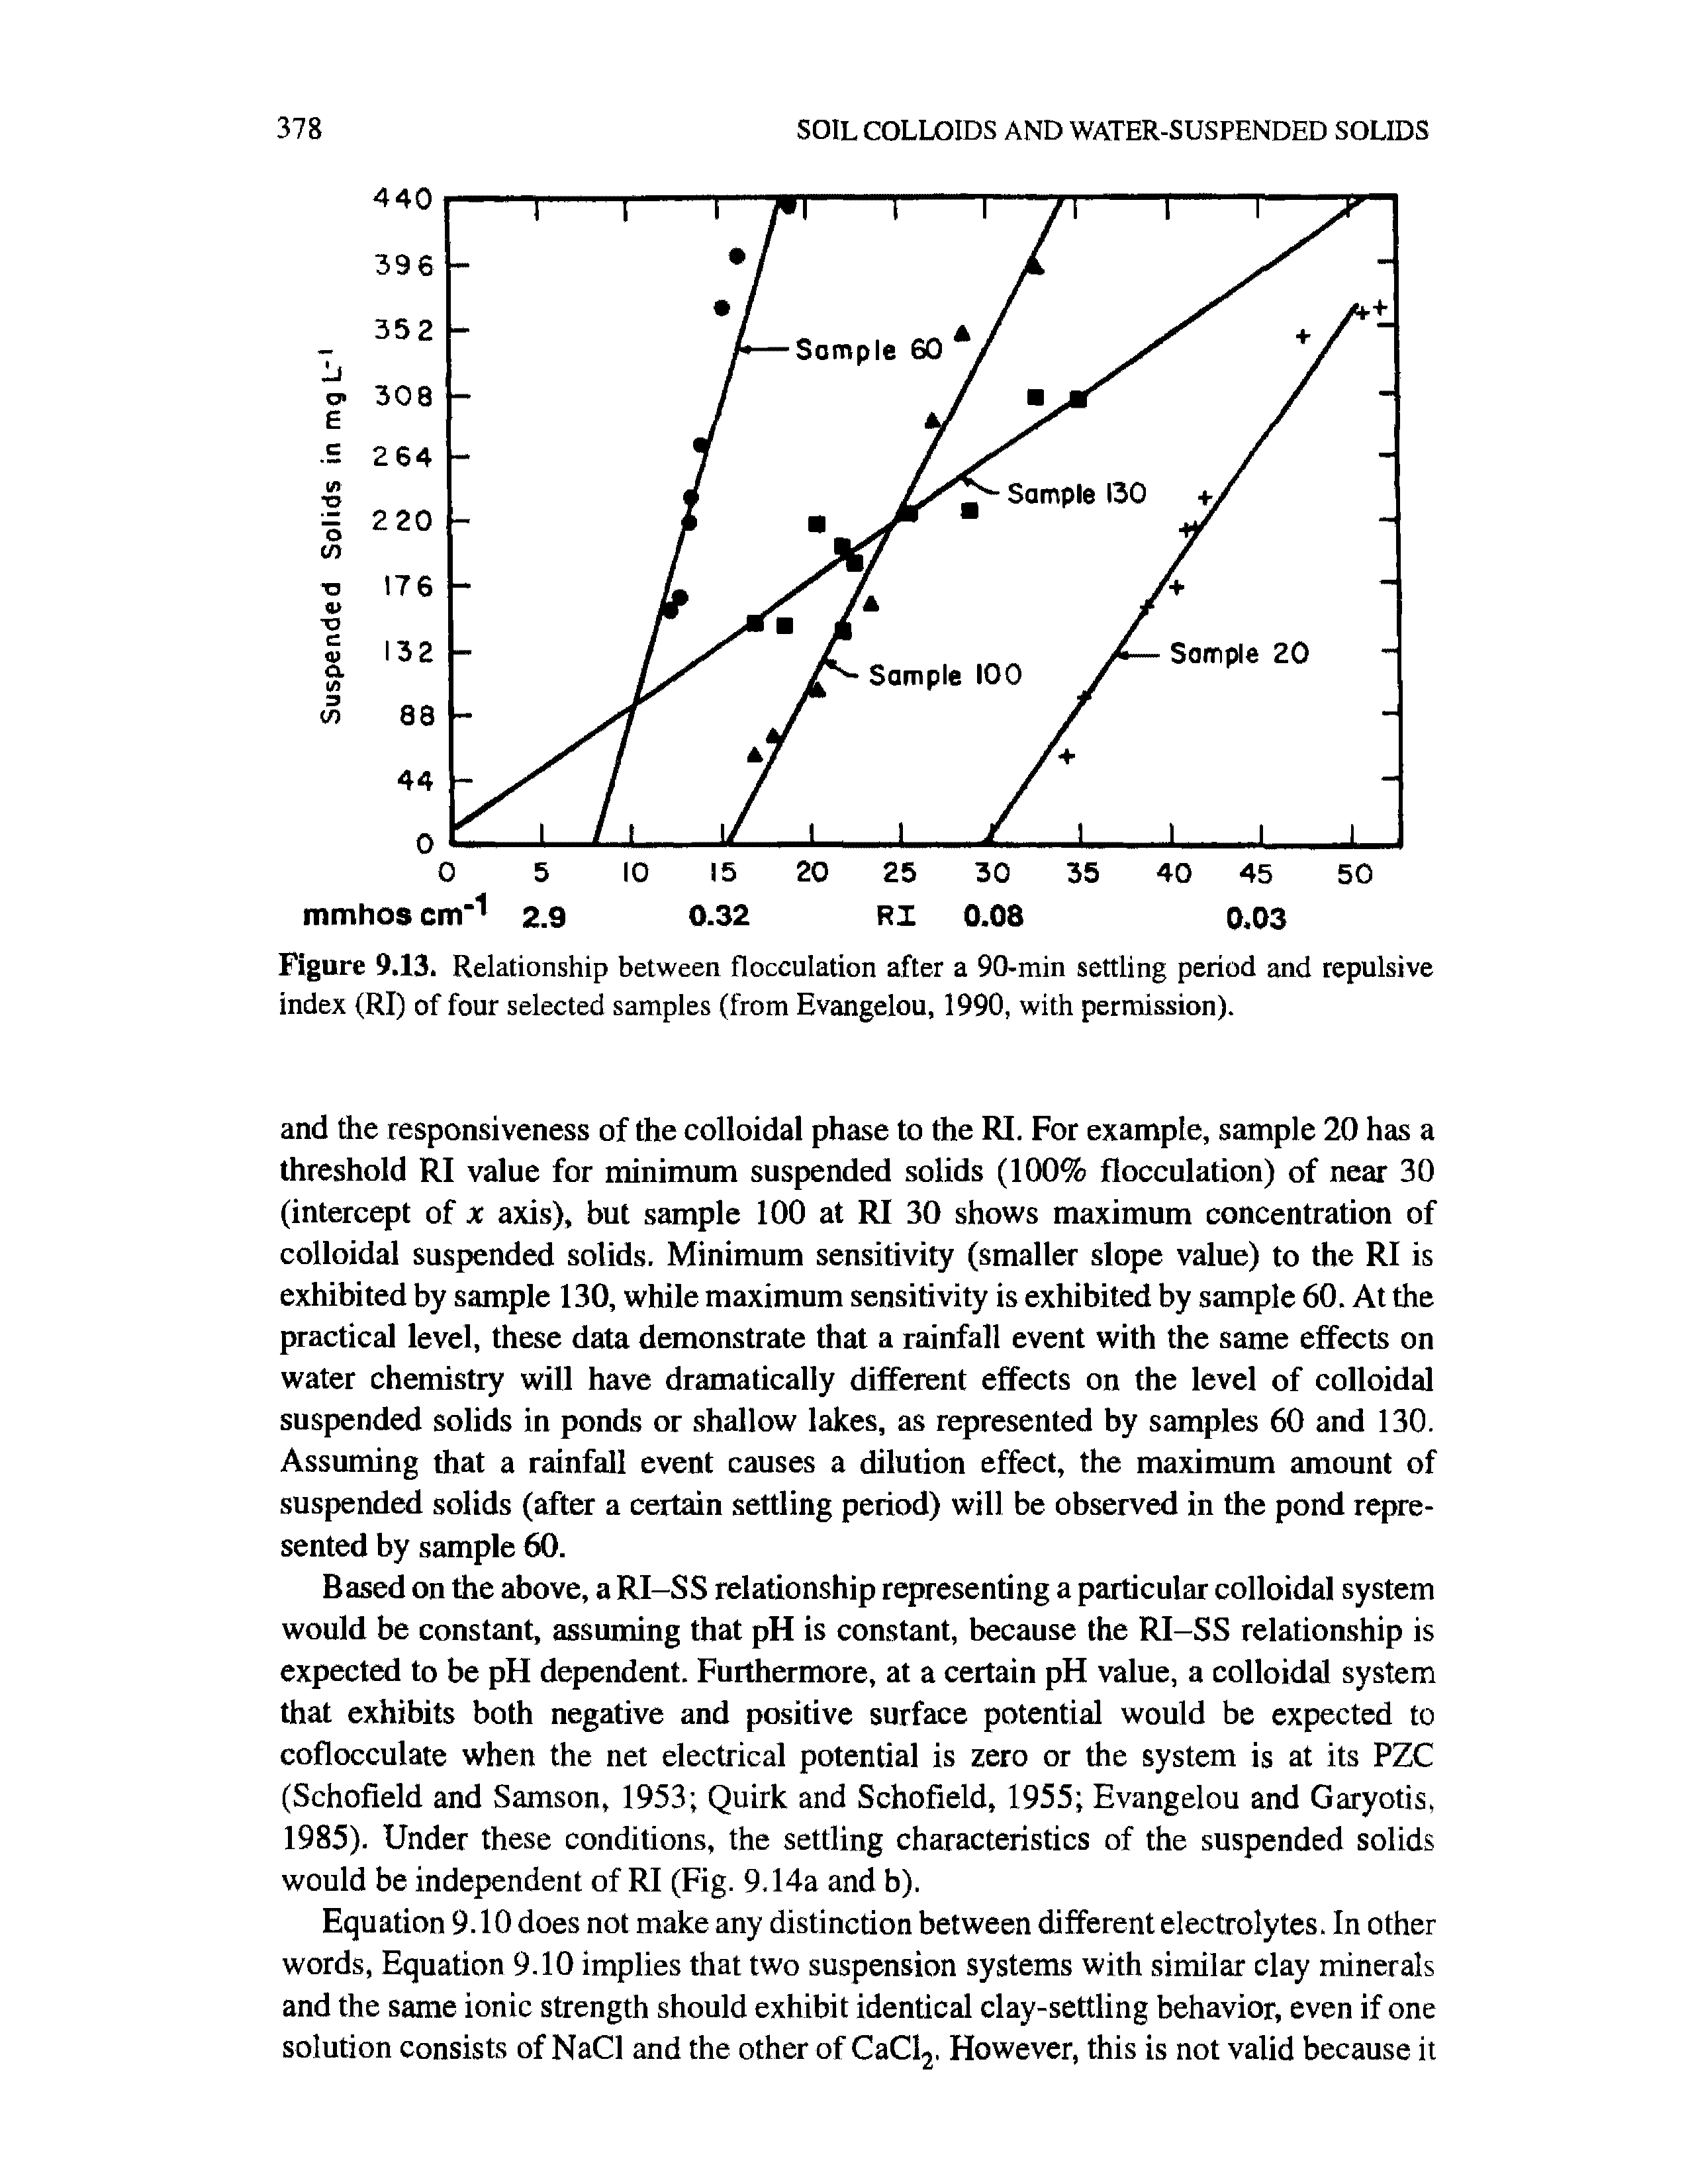 Figure 9.13. Relationship between flocculation after a 90-min settling period and repulsive index (RI) of four selected samples (from Evangelou, 1990, with permission).